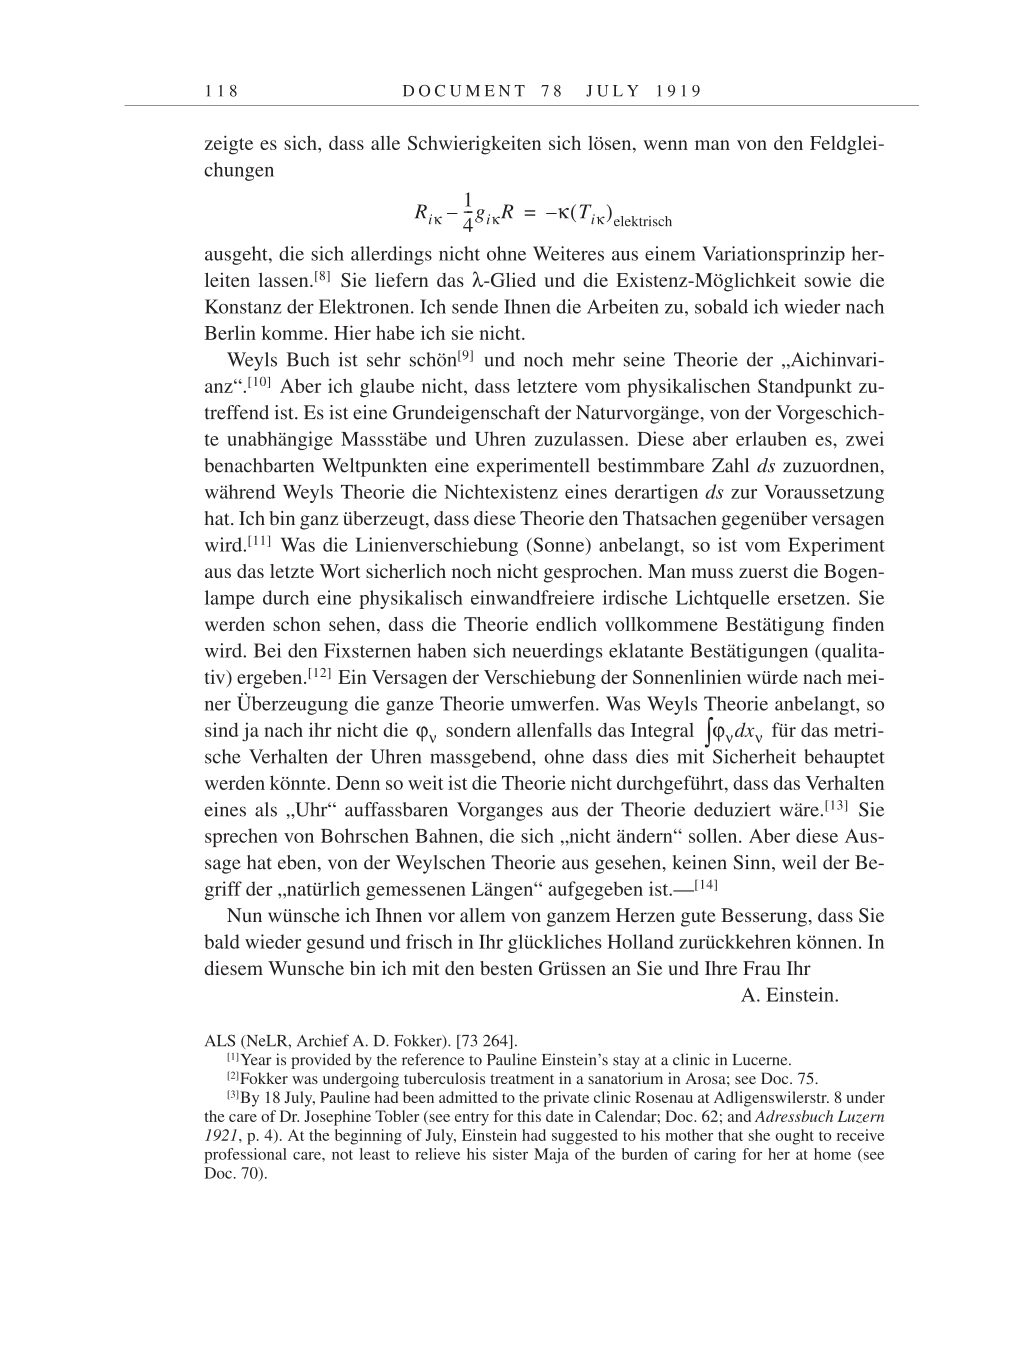 Volume 9: The Berlin Years: Correspondence January 1919-April 1920 page 118